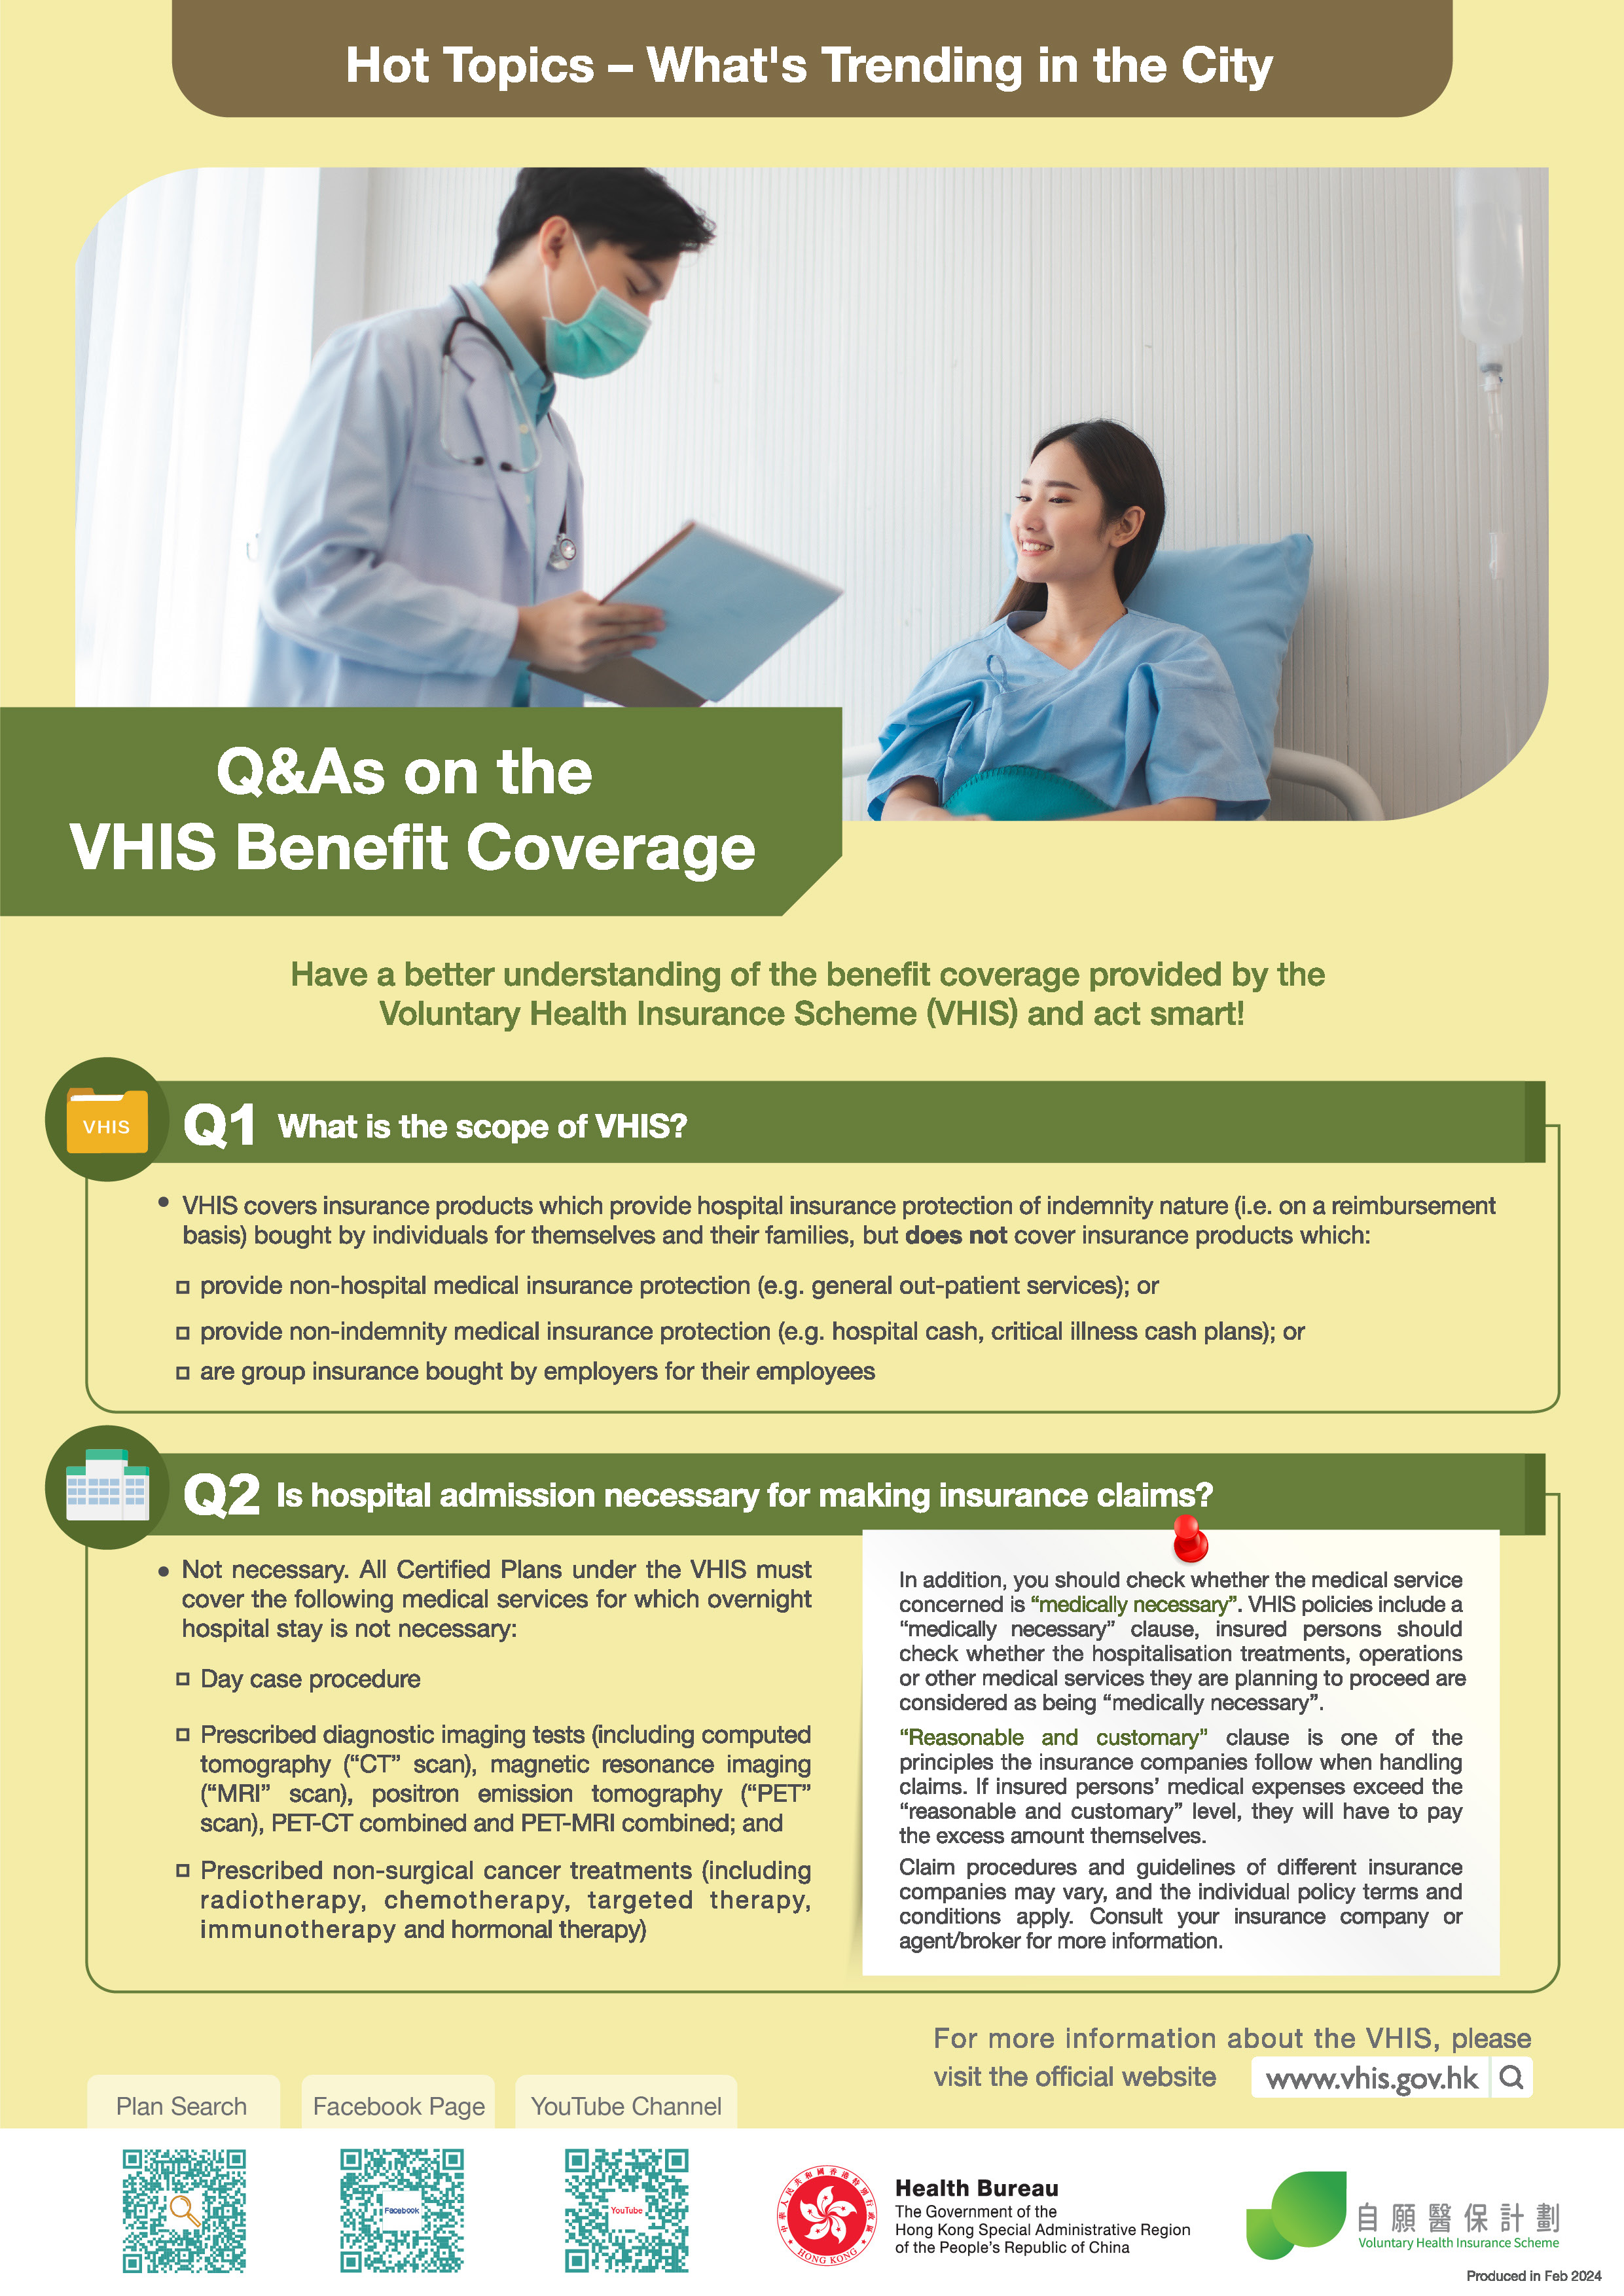 Q&As on the VHIS Benefit Coverage